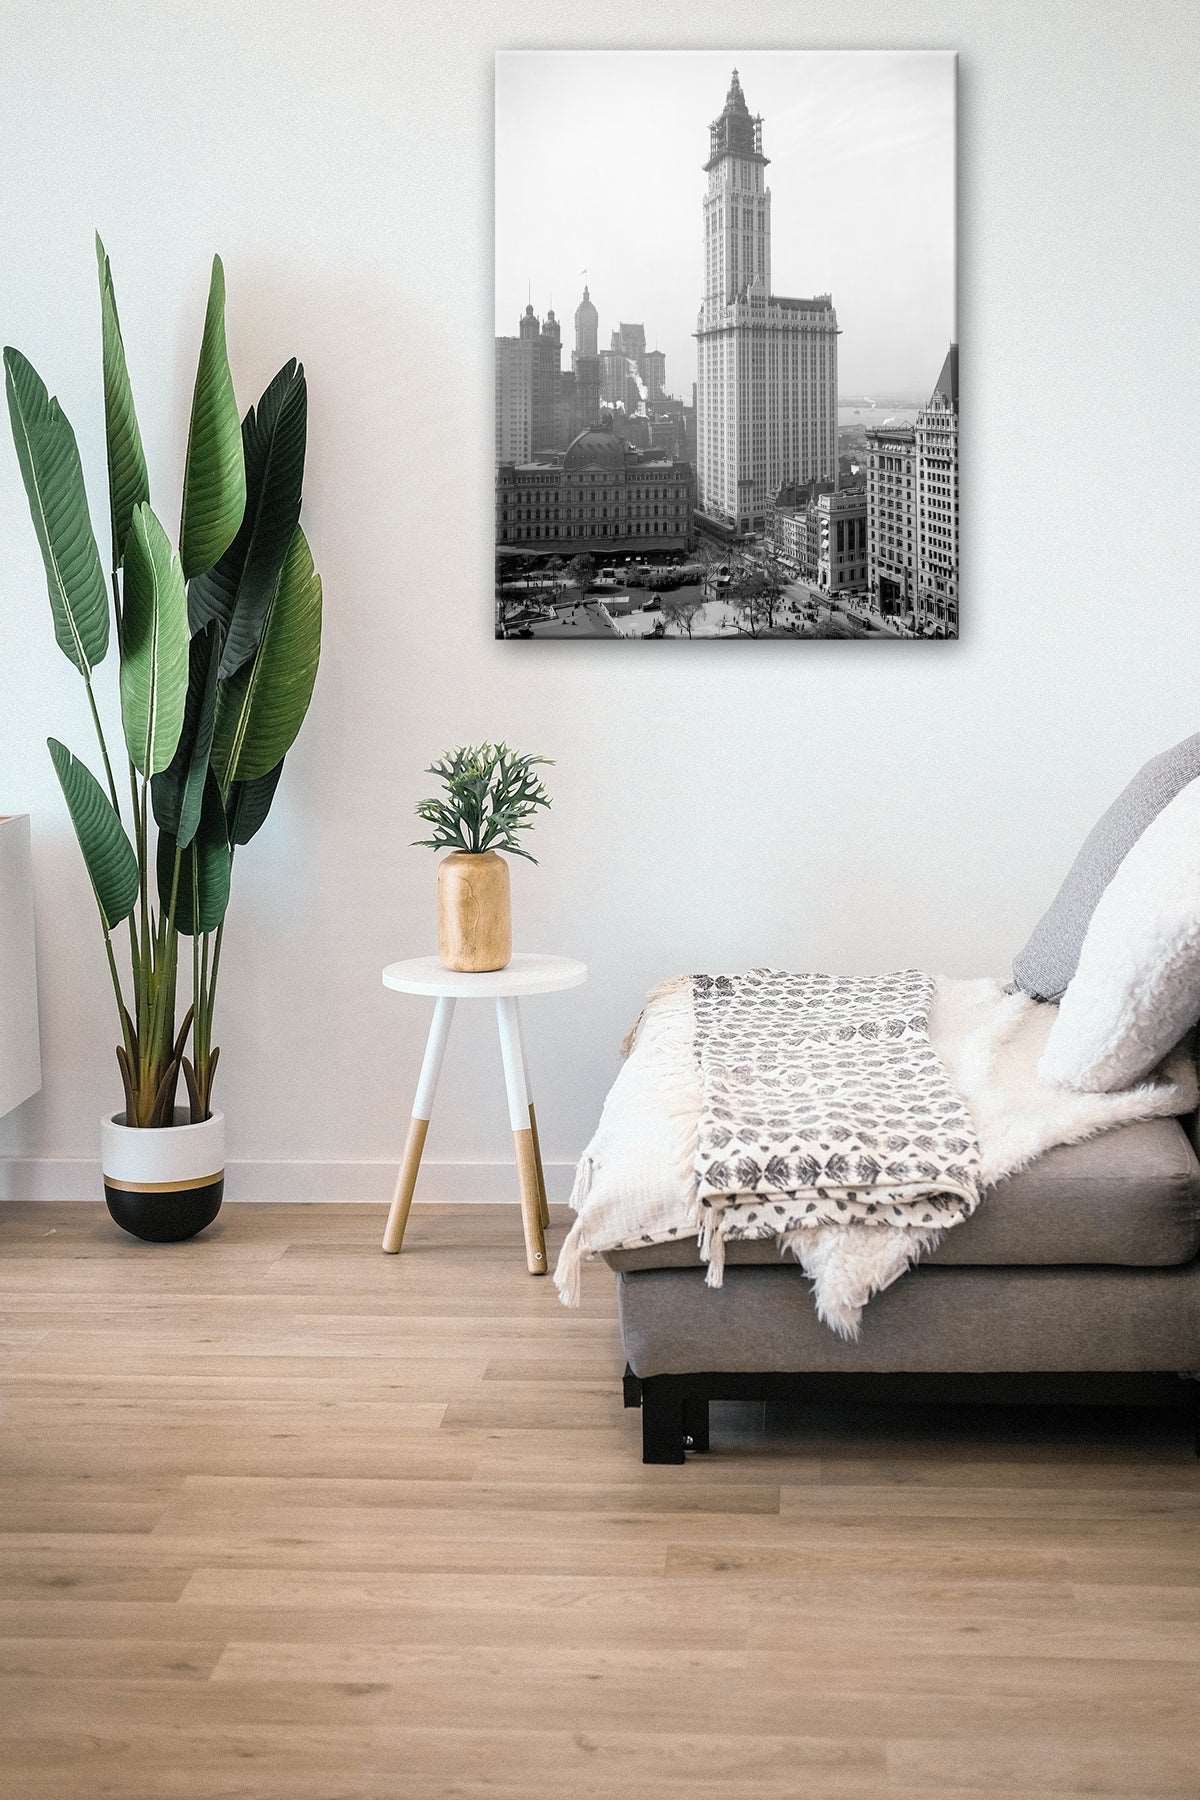 A canvas print reproduction hanging in a living room, featuring our vintage photograph of the Woolworth Building in New York City